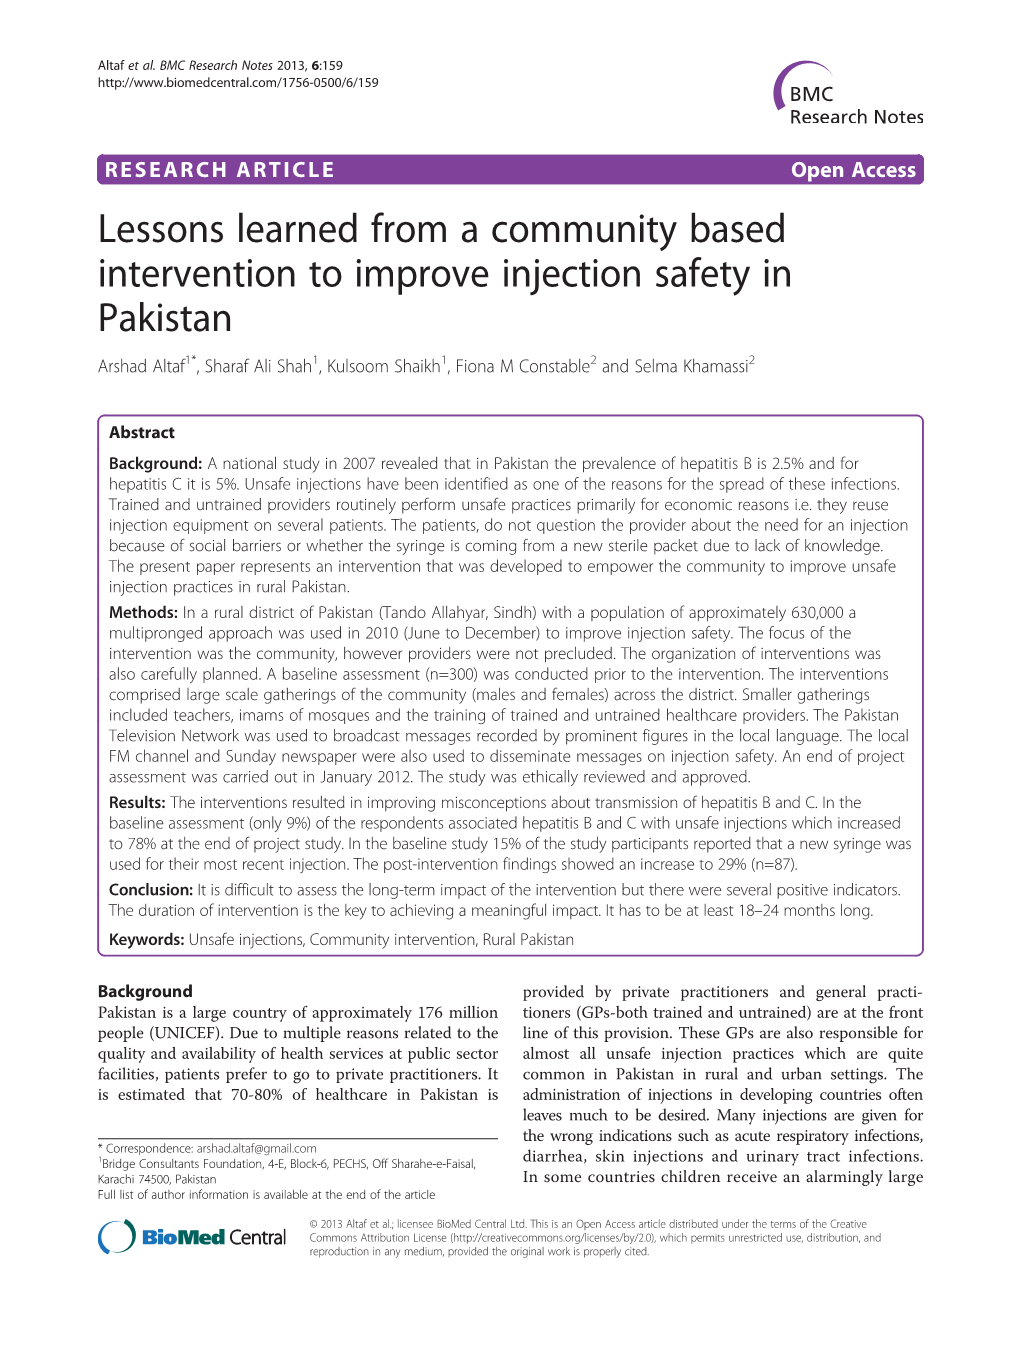 Lessons Learned from a Community Based Intervention to Improve